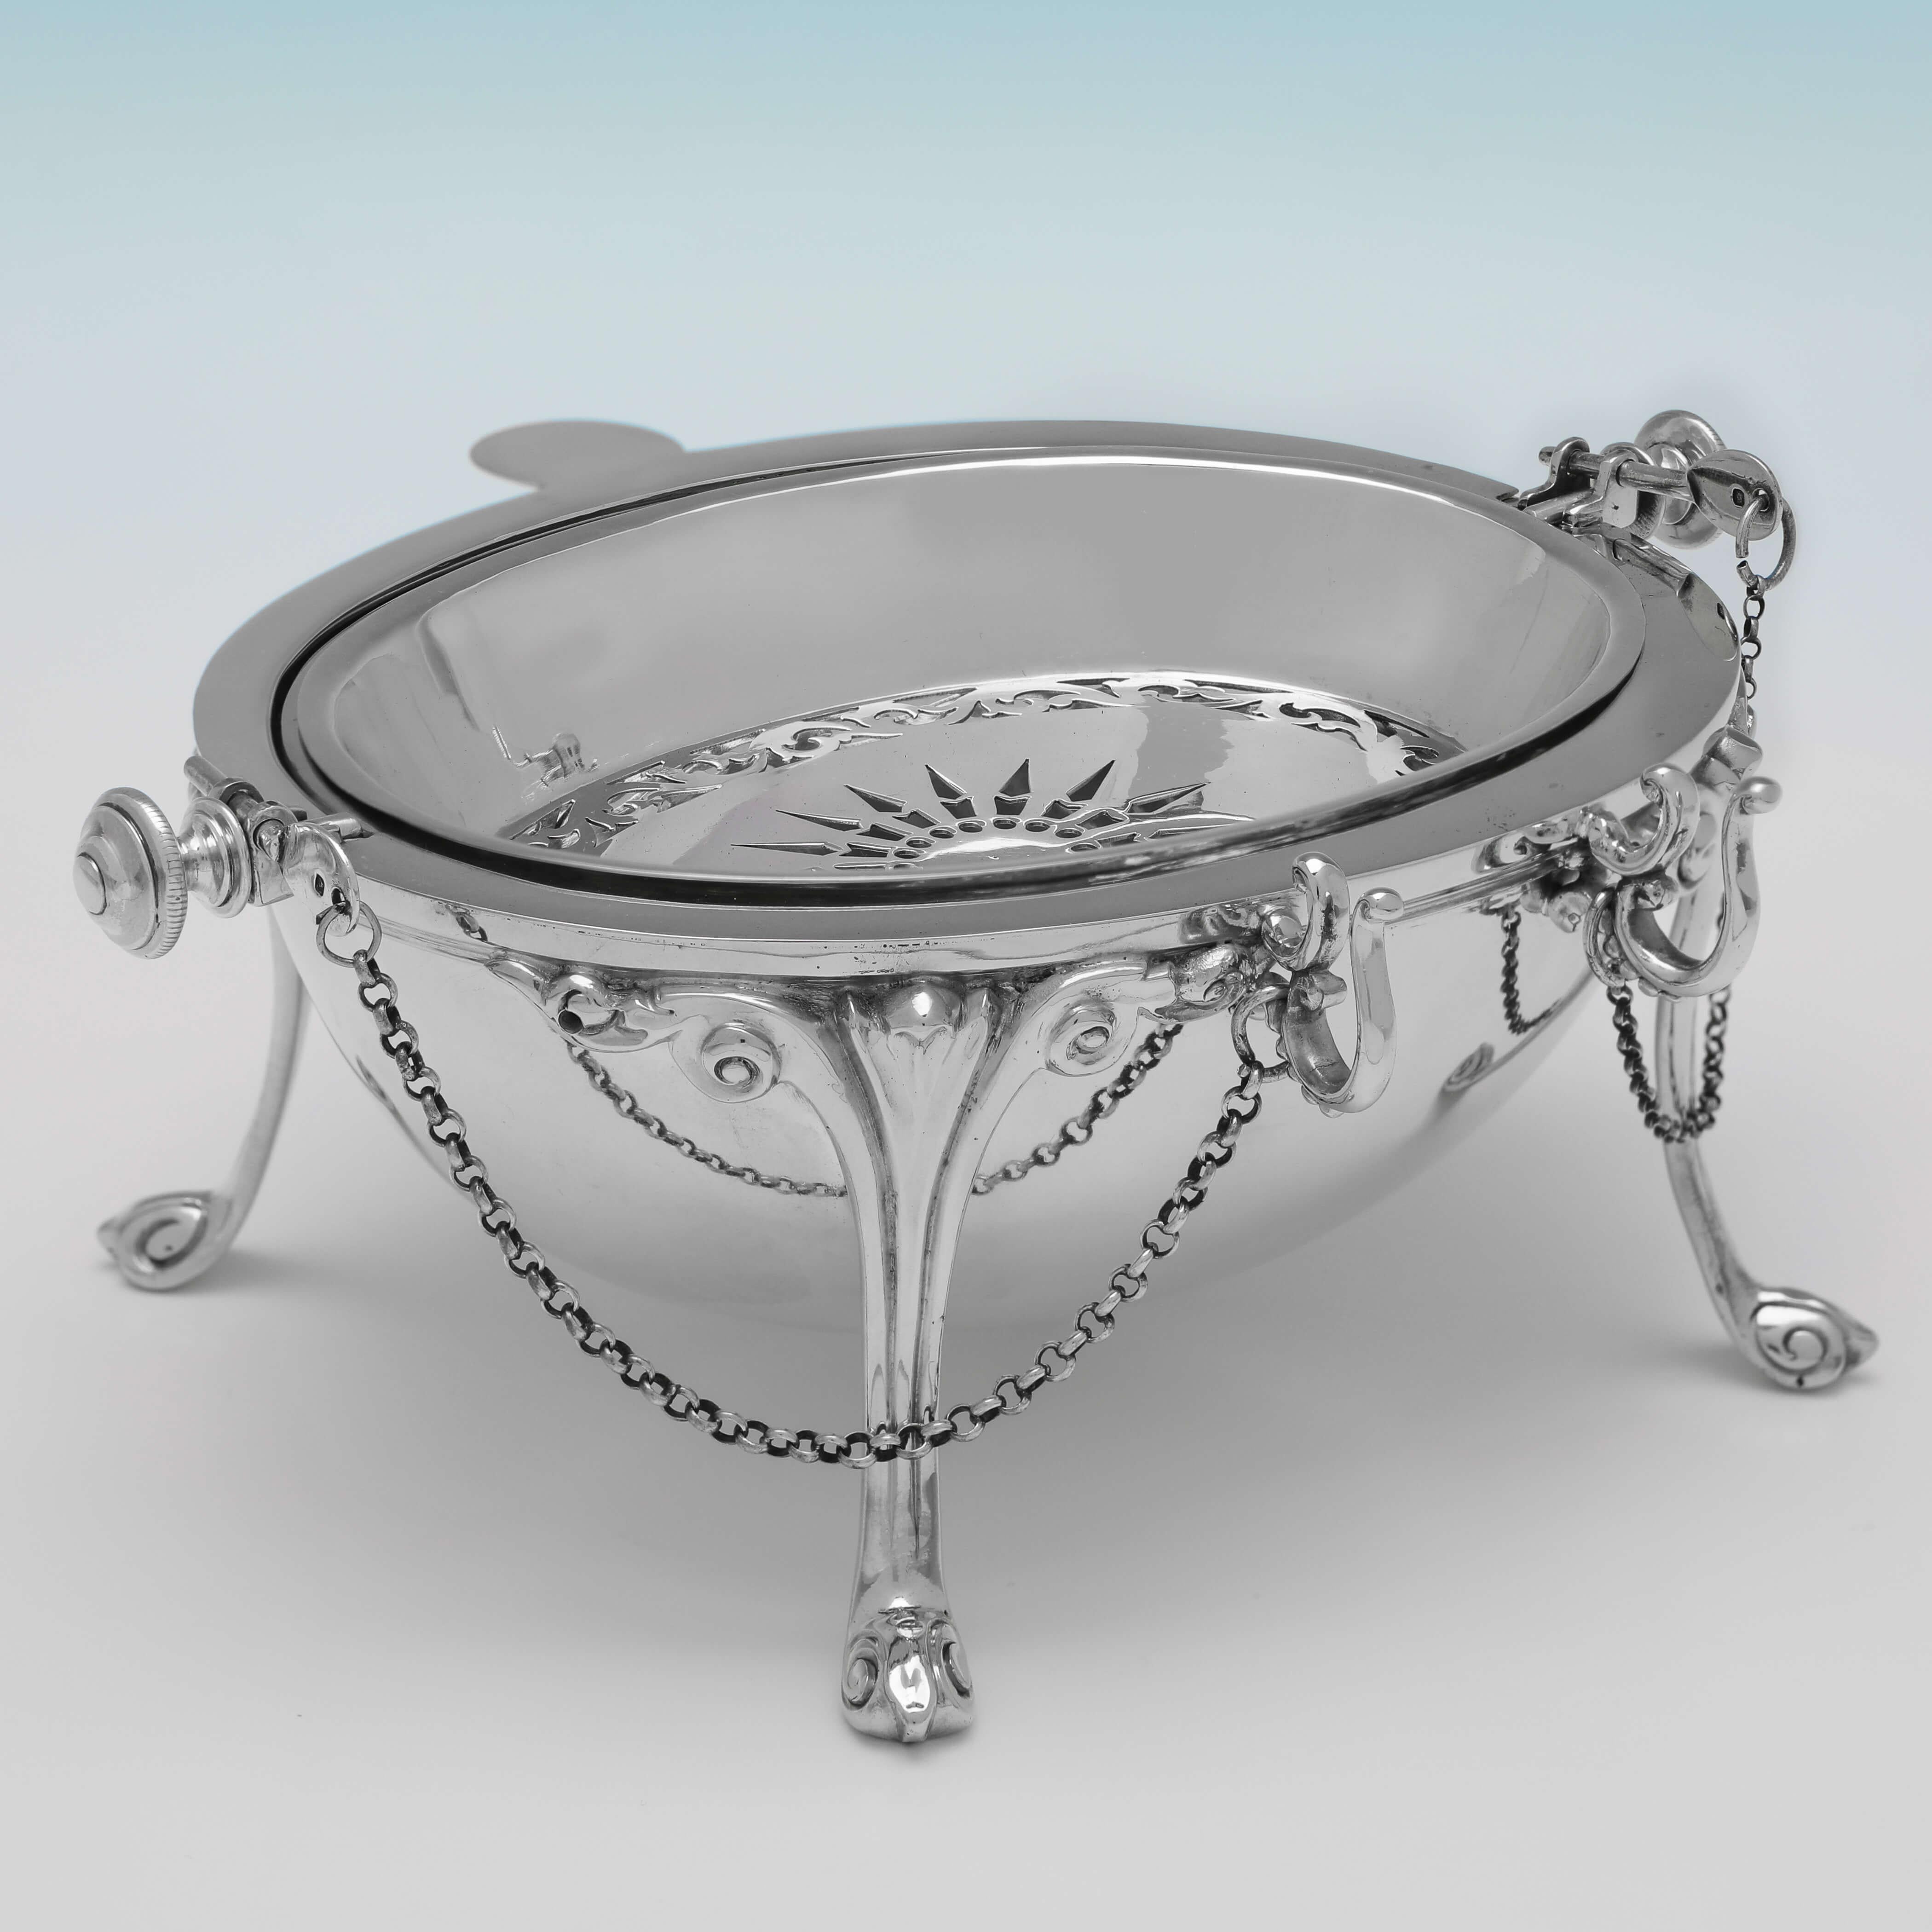 Neoclassical Revival Very Rare Victorian Sterling Silver Revolving Butter Dish, Hallmarked, 1870